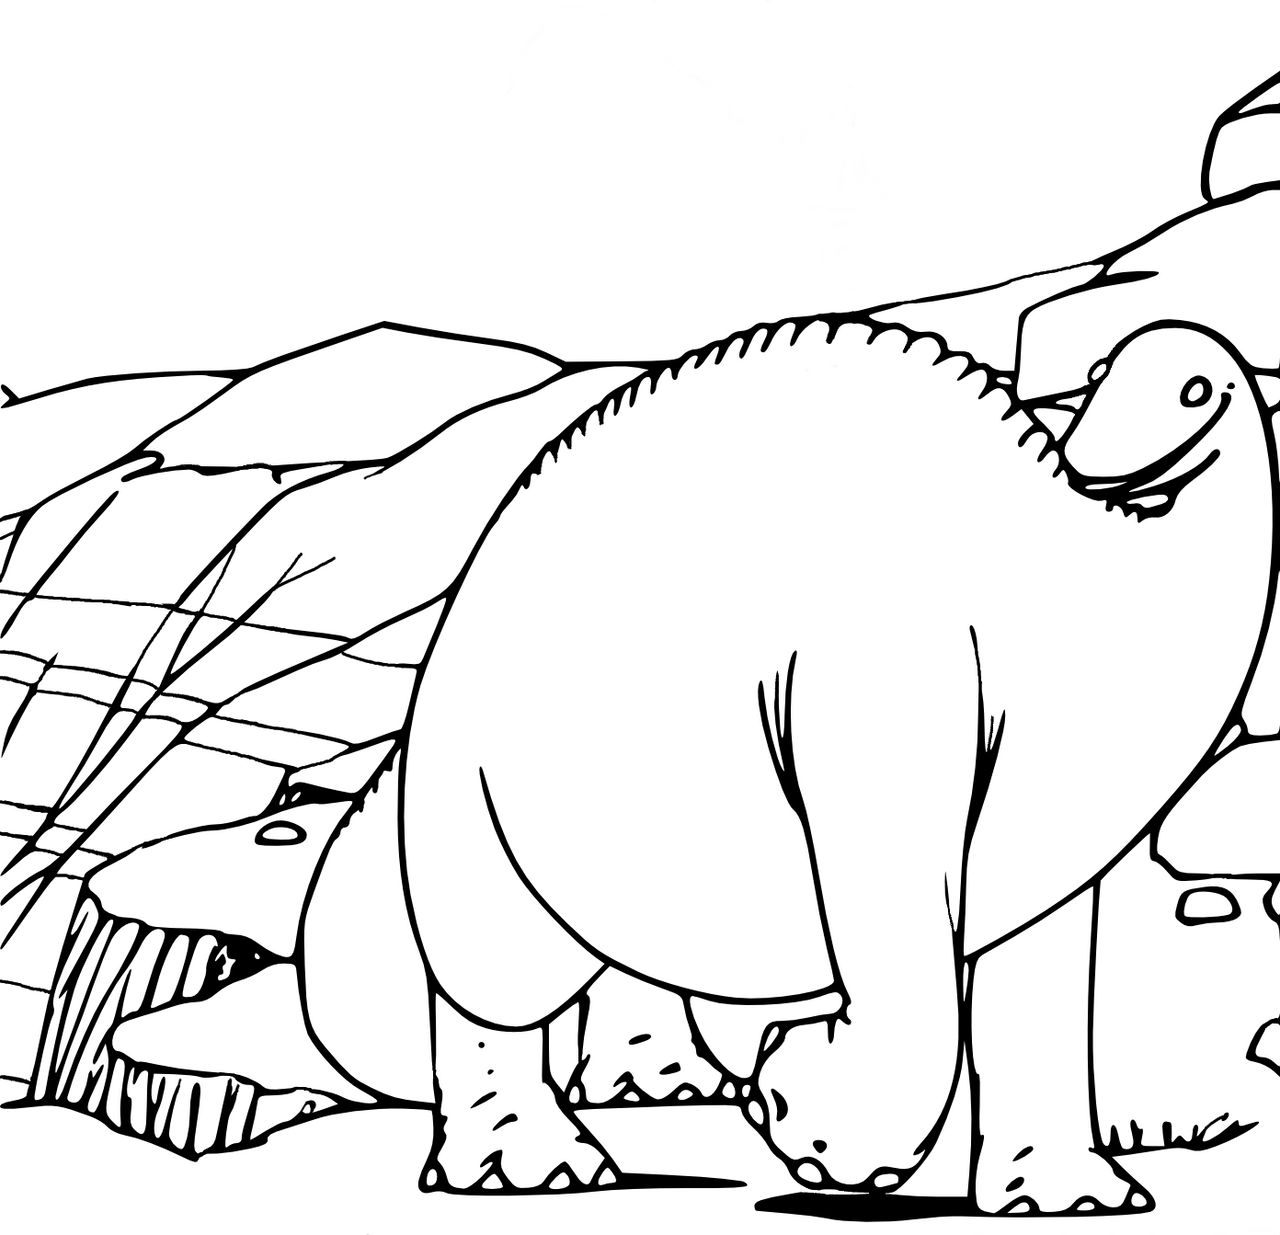 Restoration of image from Gertie the Dinosaur 1914